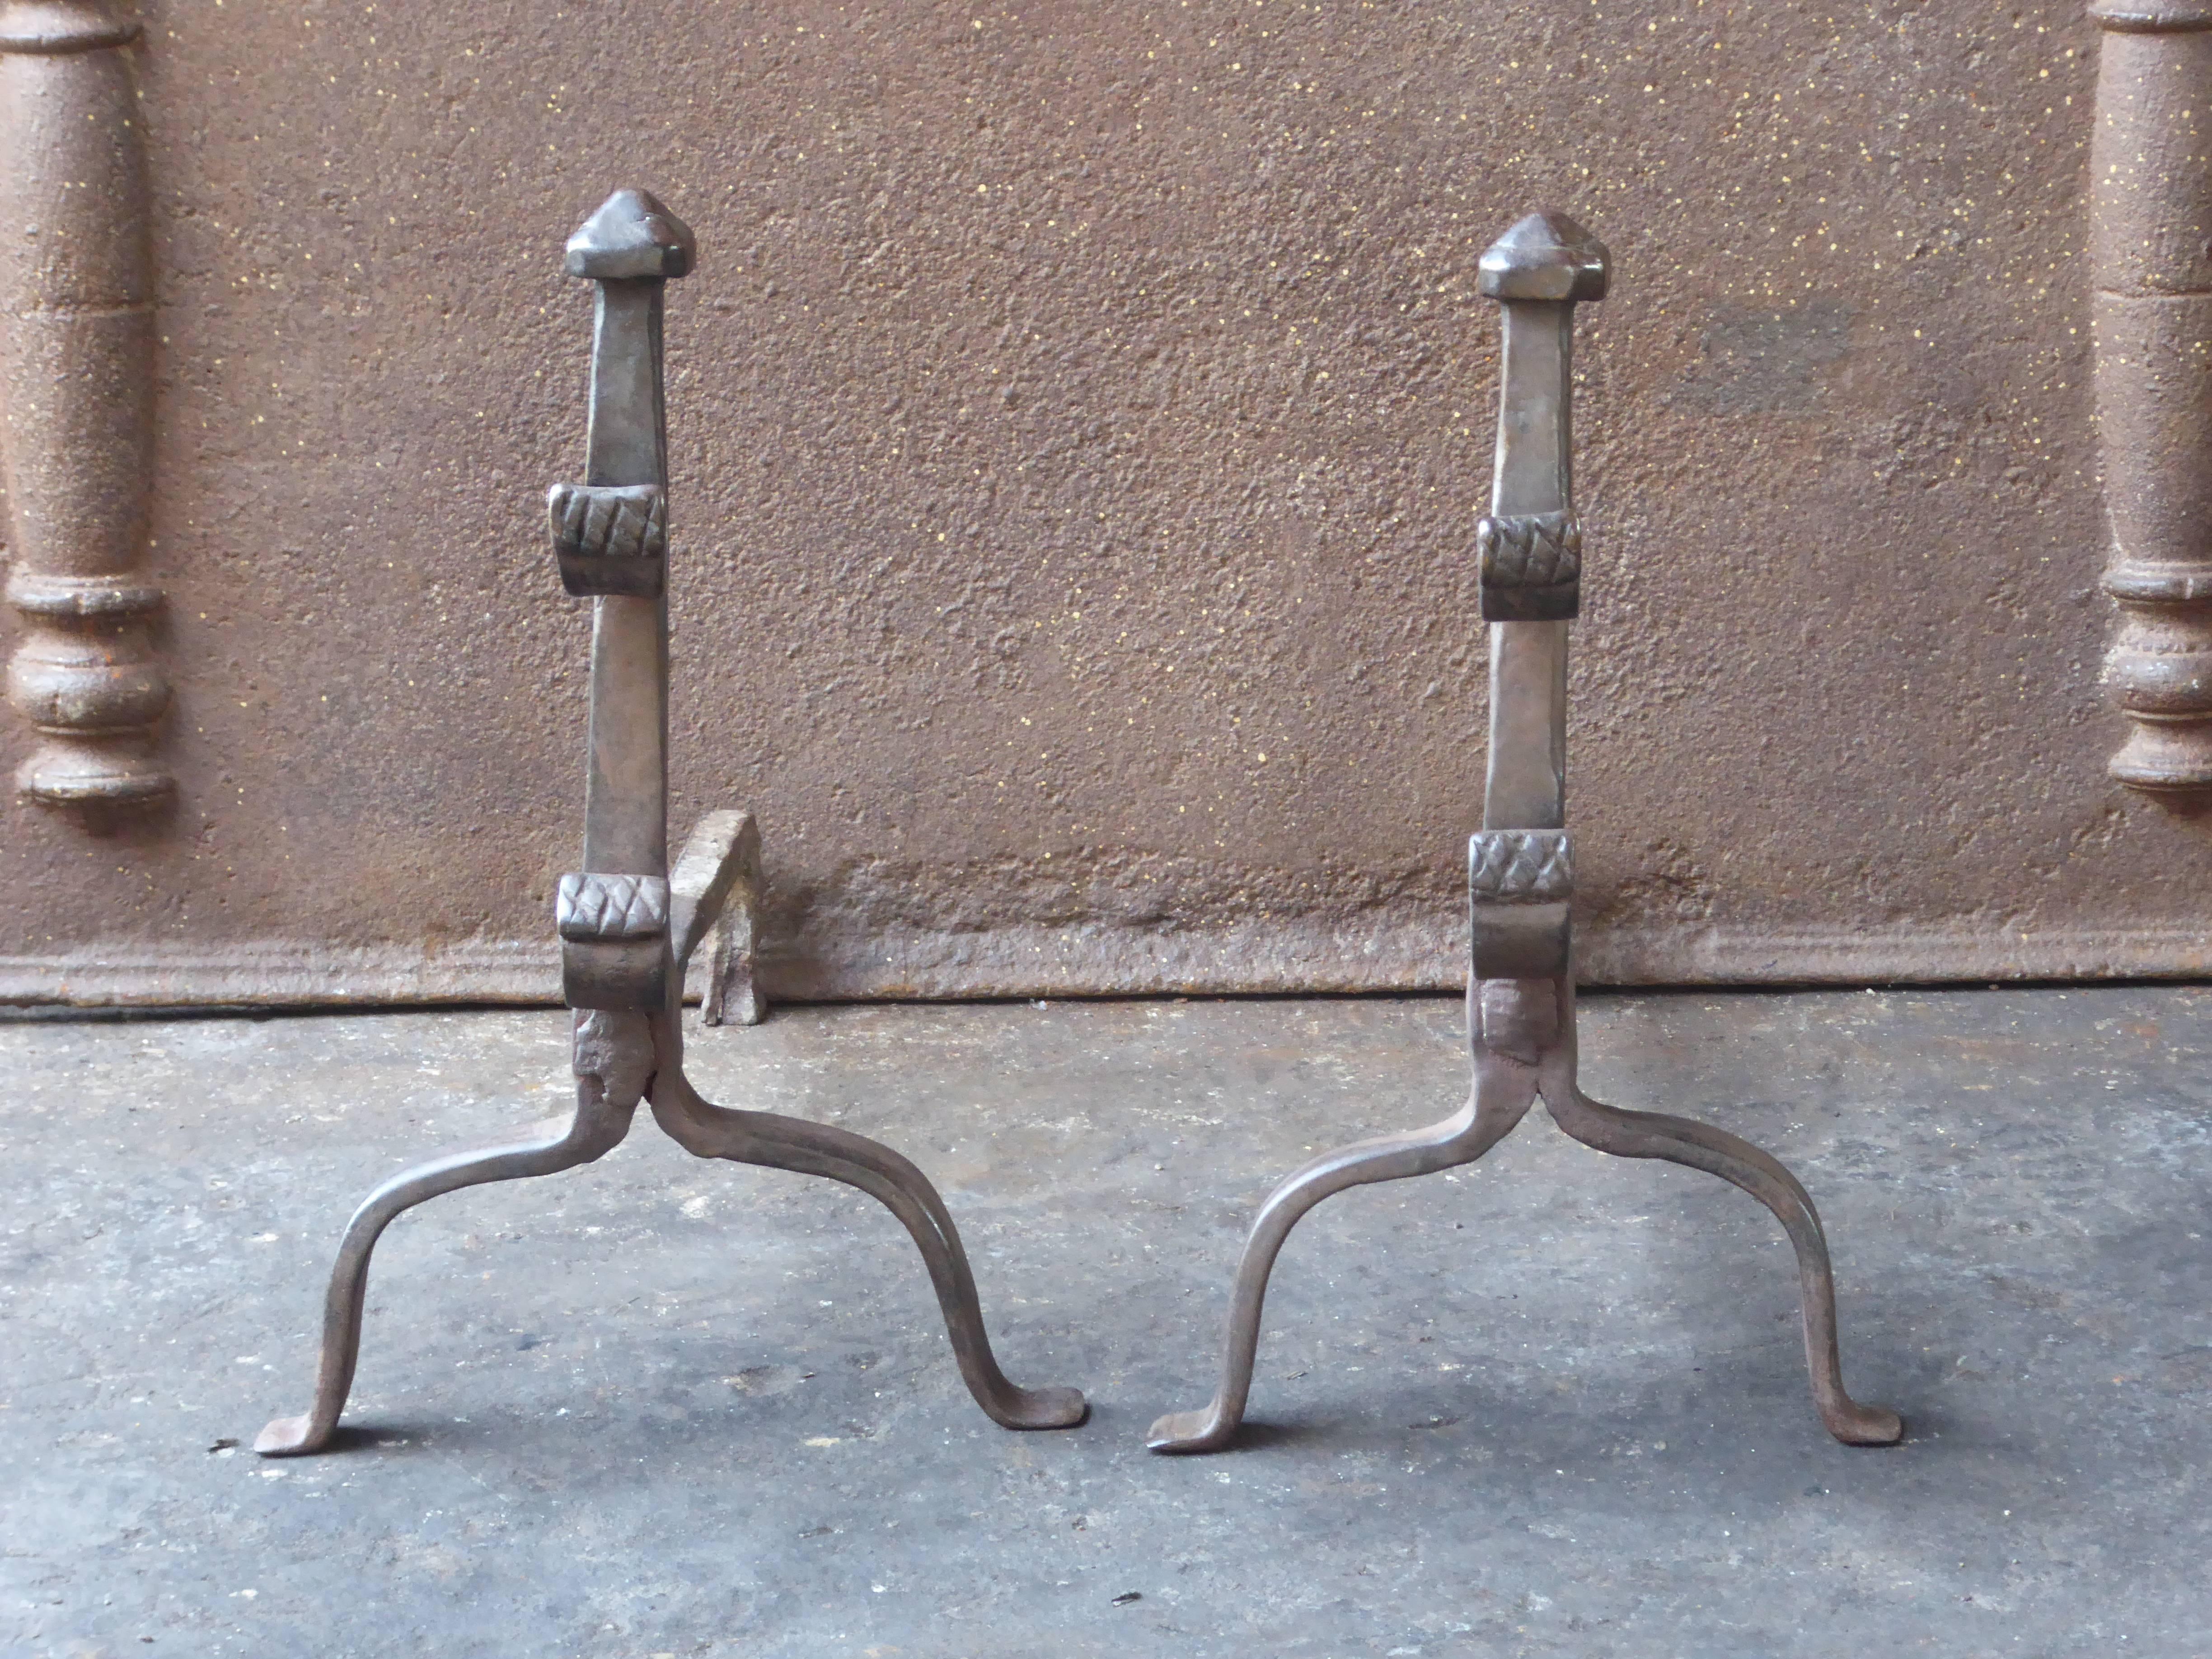 17th century French Gothic andirons made of wrought iron.

We have a unique and specialized collection of antique and used fireplace accessories consisting of more than 1000 listings at 1stdibs. Amongst others, we always have 300+ firebacks, 250+